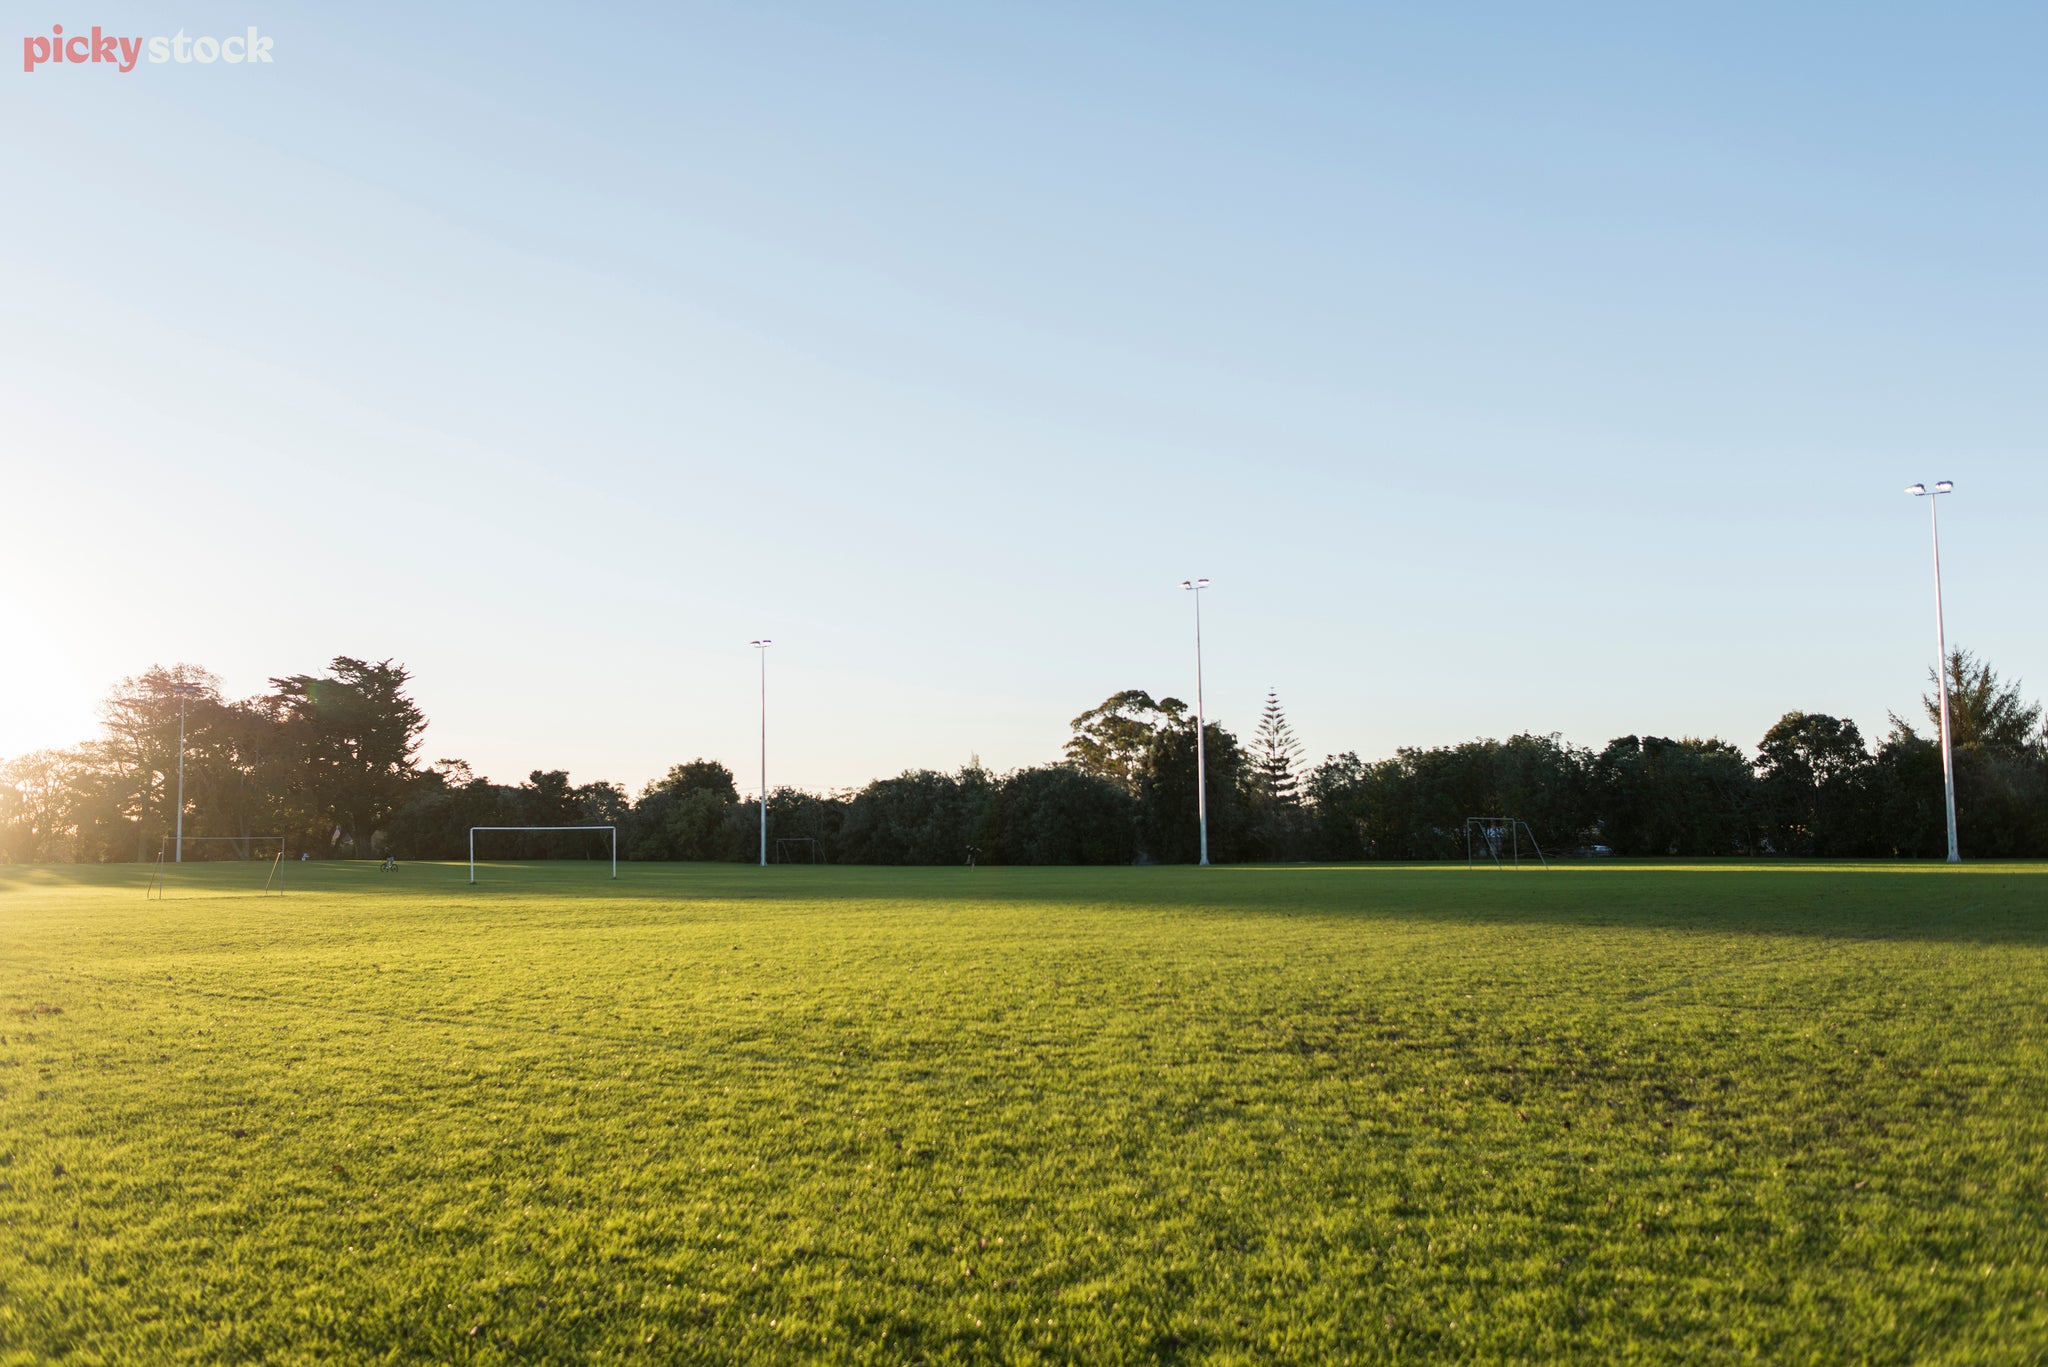 Early morning on a football or soccer field, the field lights rise high into the blue sky.